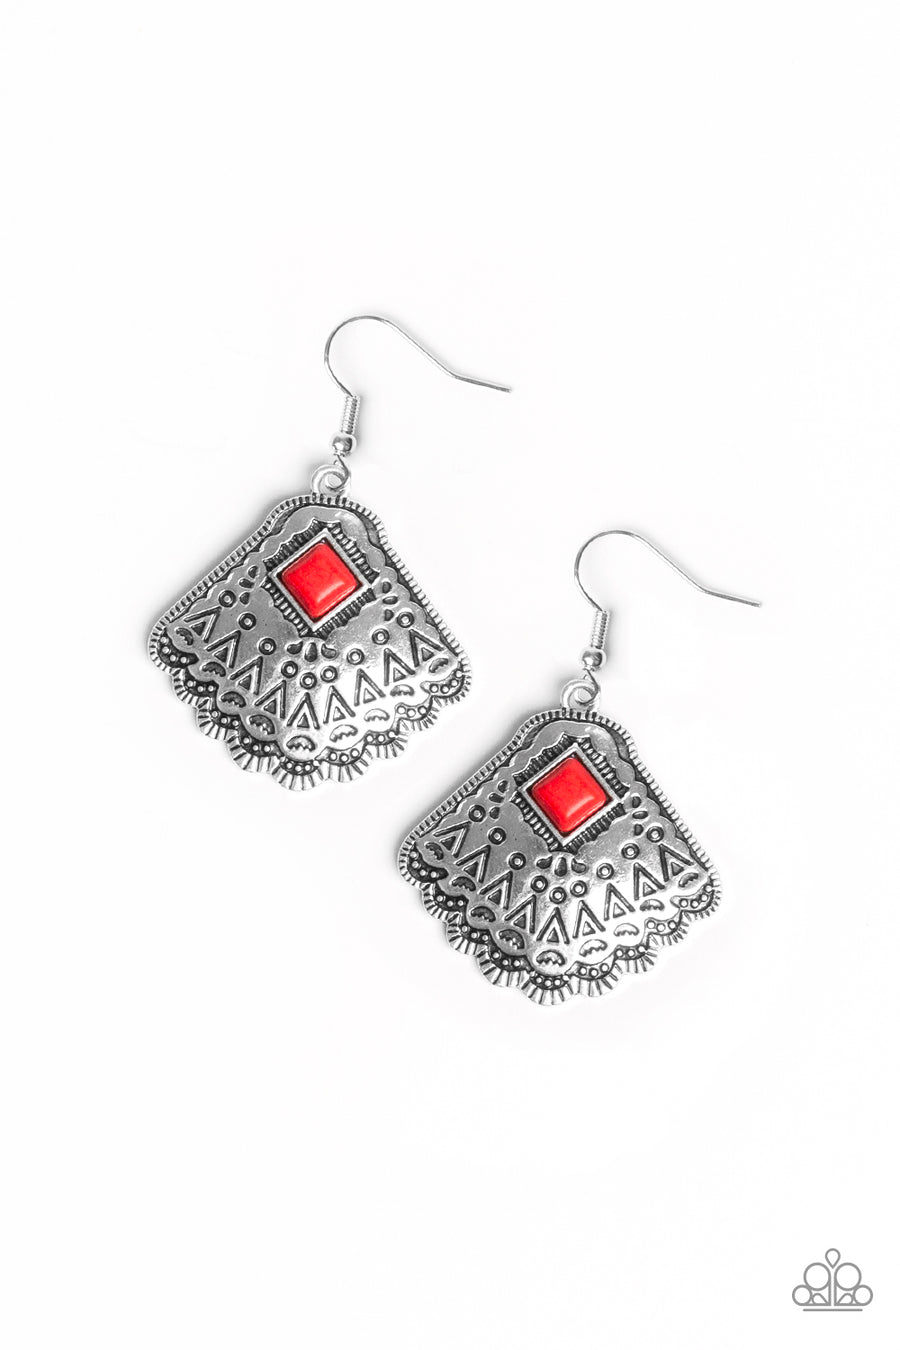 Mountain Mesa - Red Stone Earrings  - Paparazzi Accessories